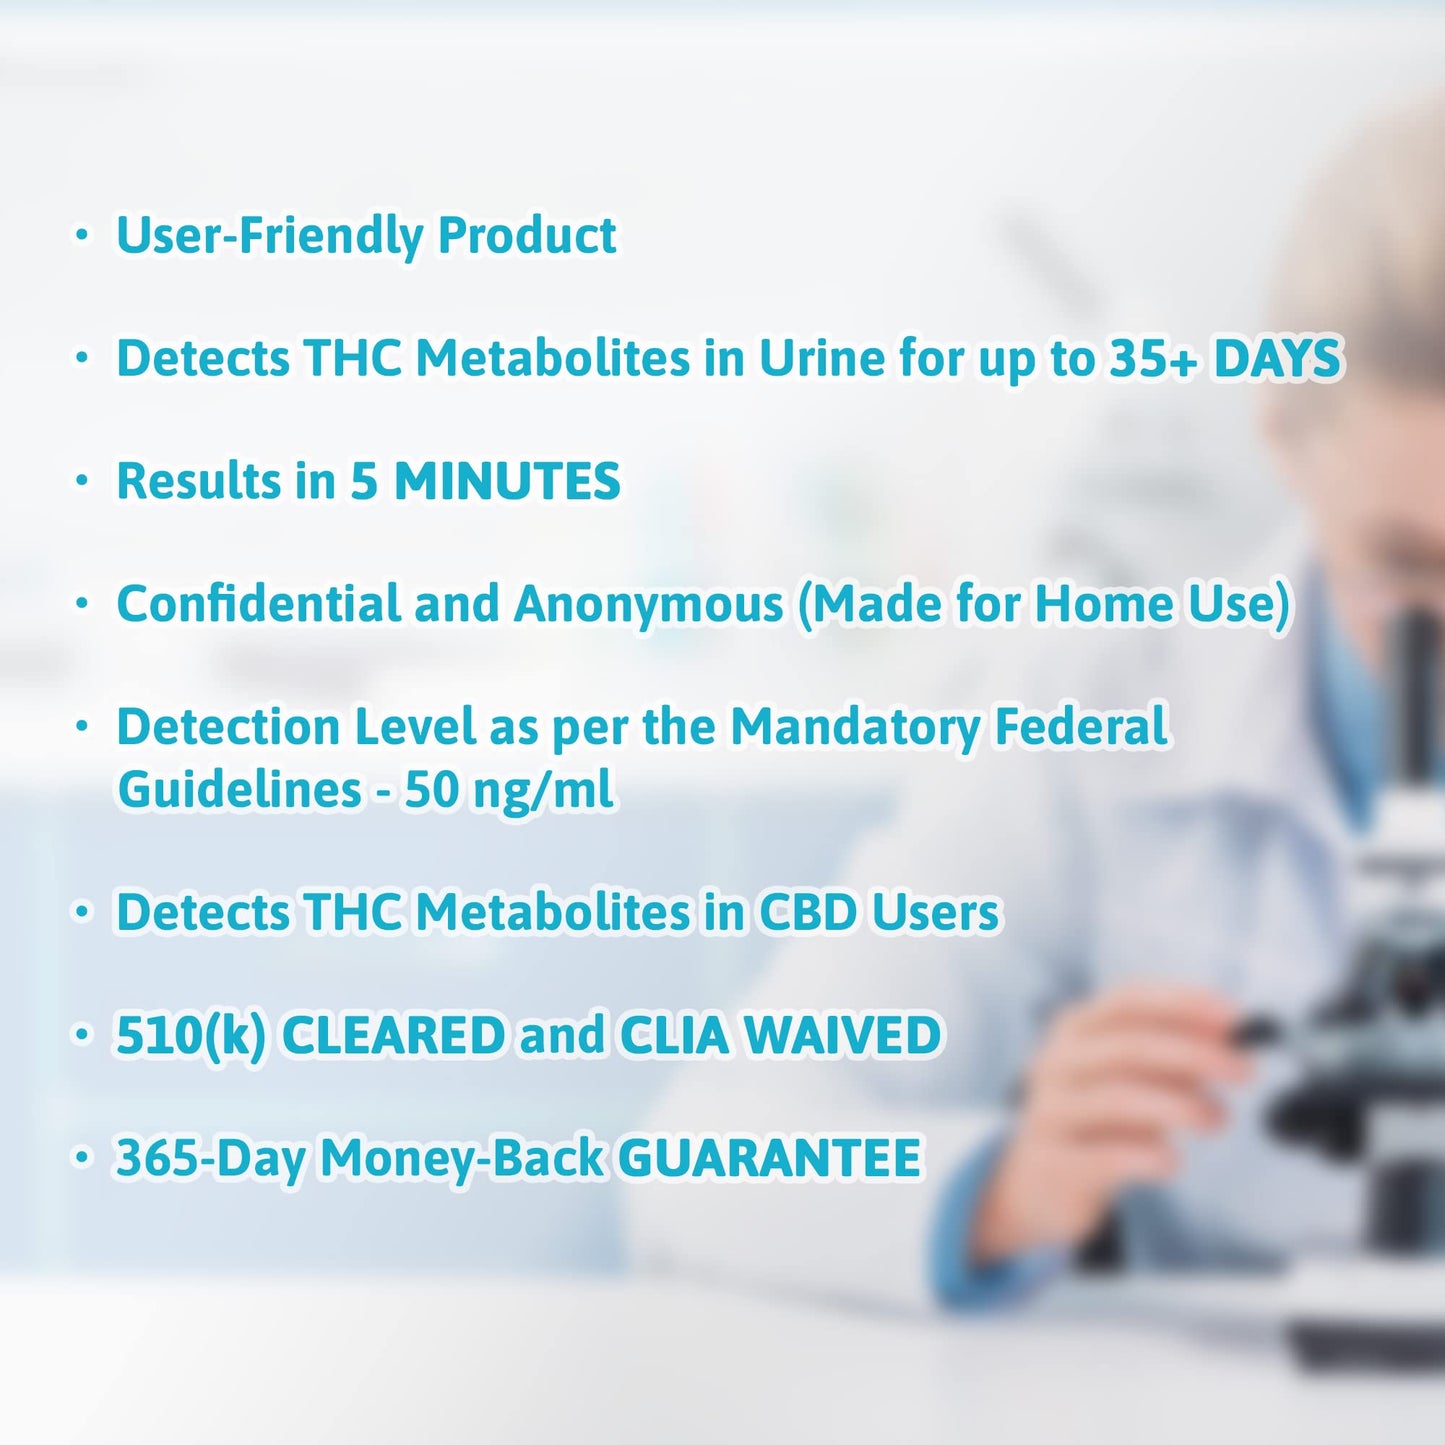 User friendly product that detects THC metabolites in Urine for up to 35+ days